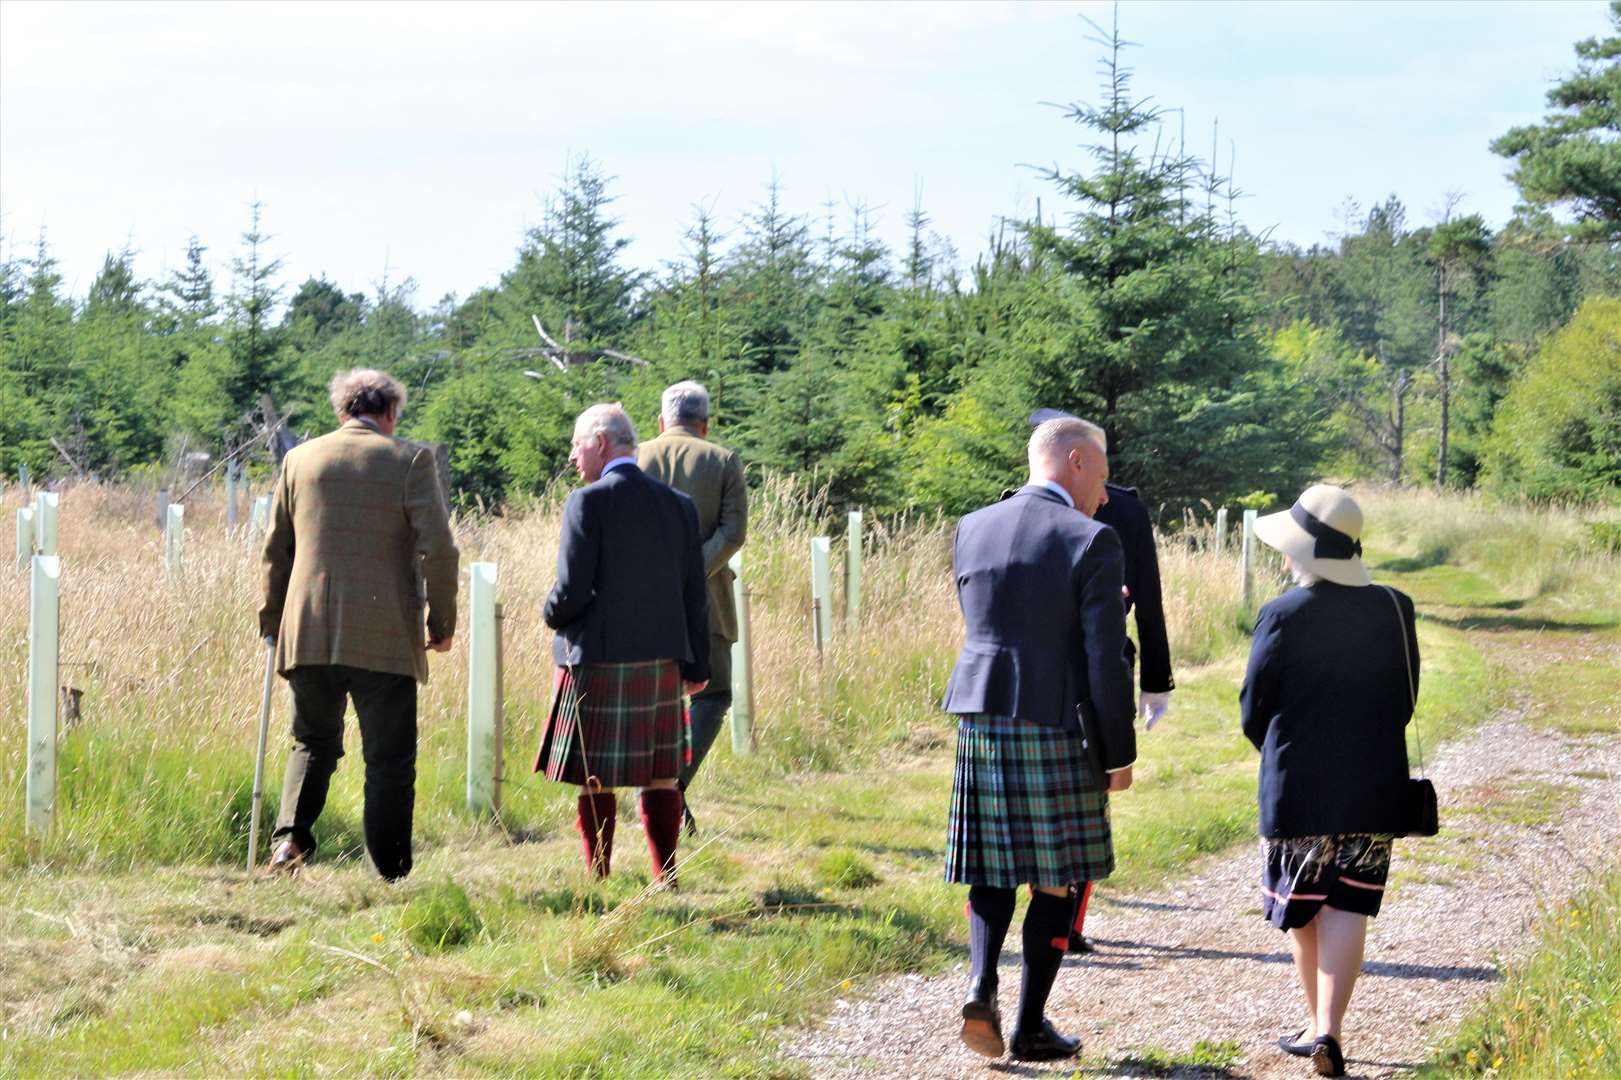 Prince Charles with the royal party at Dunnet Forest. Lord and Lady Thurso, Andrew Wands and Robert Lovie from the Prince's Foundation were present.